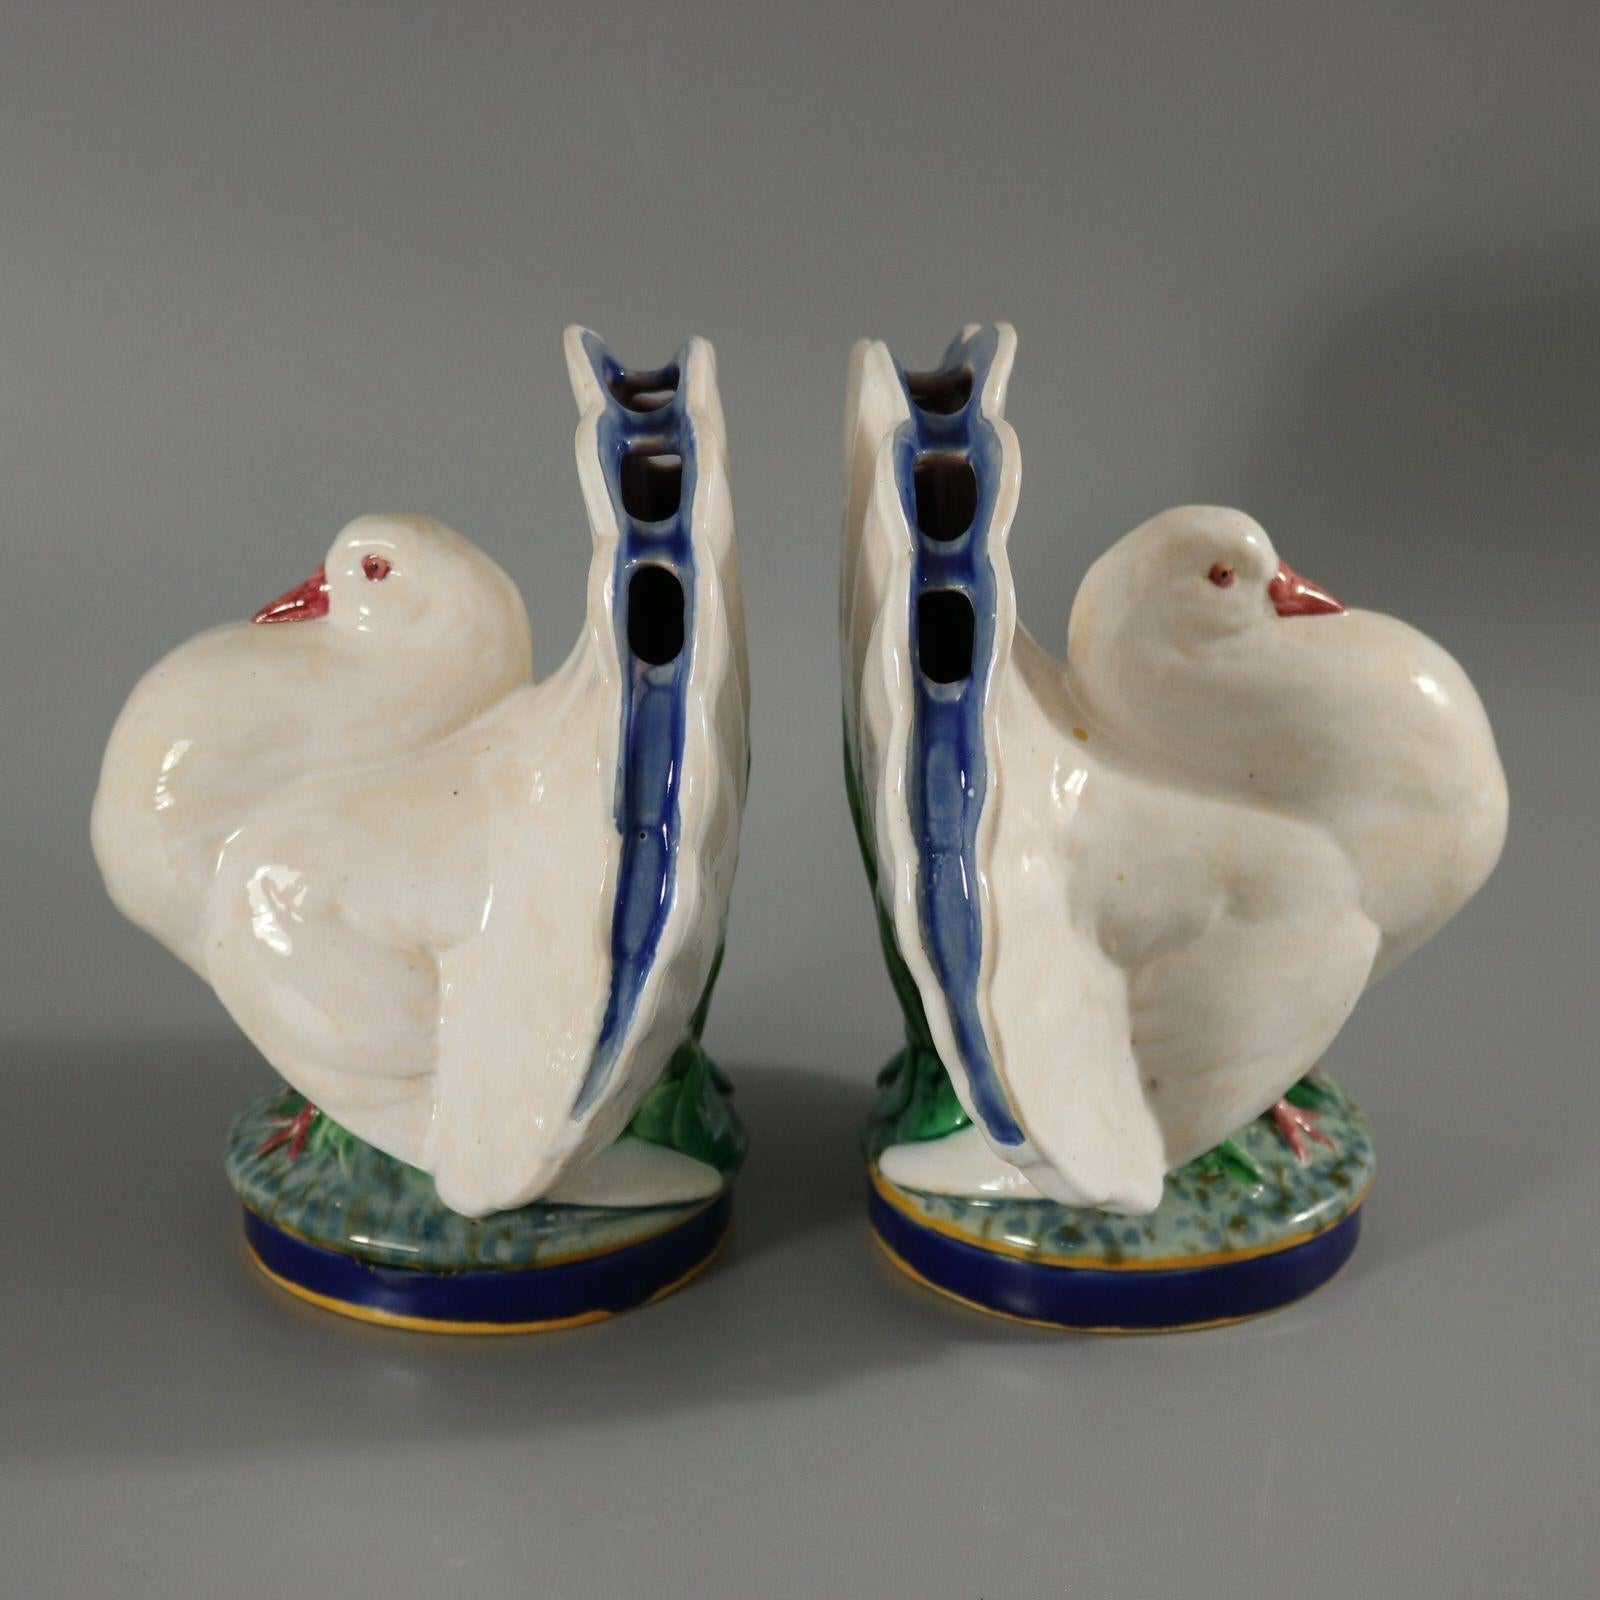 Pair of Minton Majolica flower holders which feature a fantail pigeon, standing on a leafy base. Flower inserts around the tail. Colouration: white, green, cobalt blue, are predominant. The piece bears maker's marks for the Minton pottery. Bears a